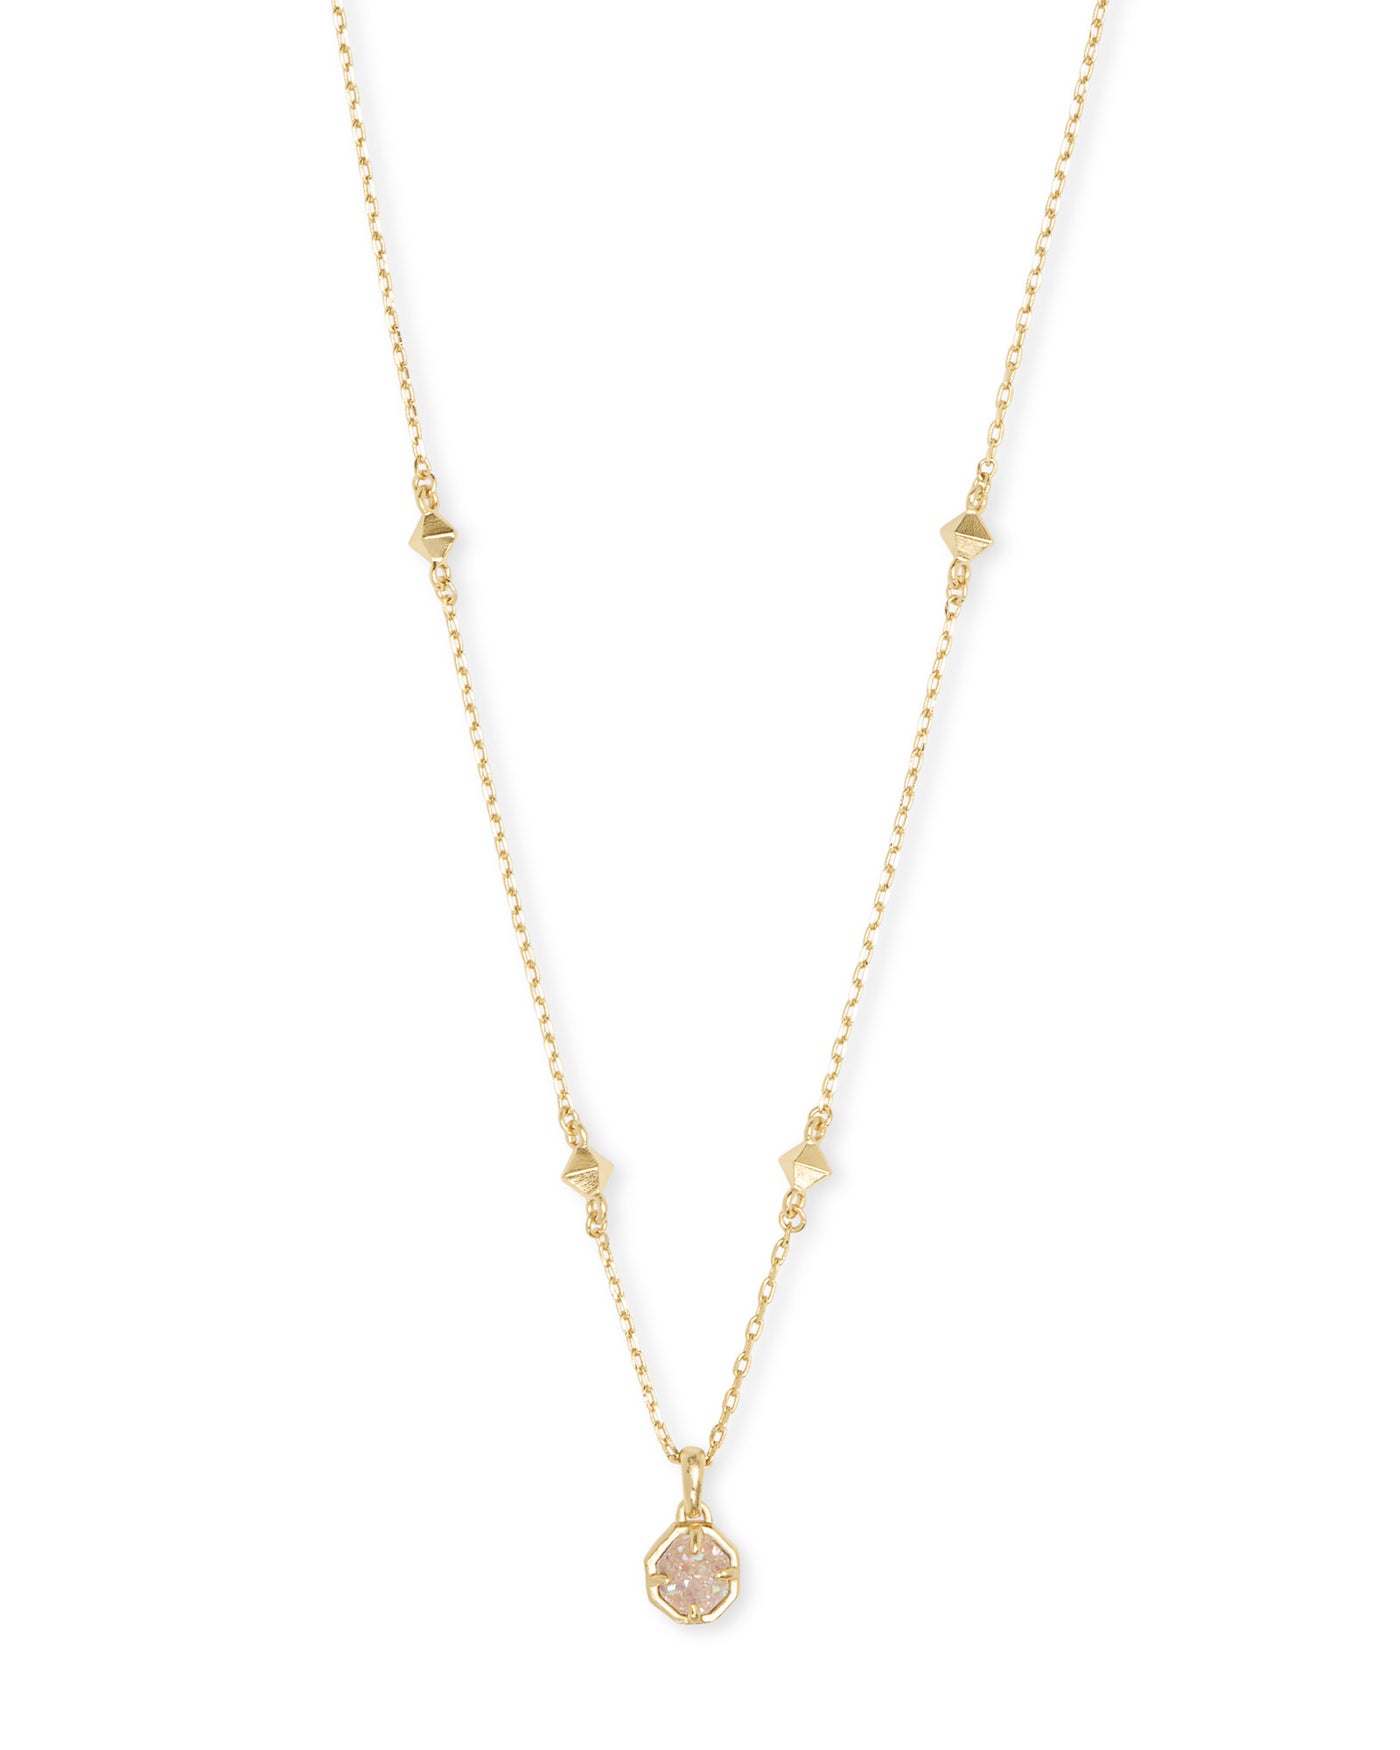 Kendra Scott Nola Short Pendant Necklace in Gold Iridescent Drusy-Necklaces-Kendra Scott-Market Street Nest, Fashionable Clothing, Shoes and Home Décor Located in Mabank, TX